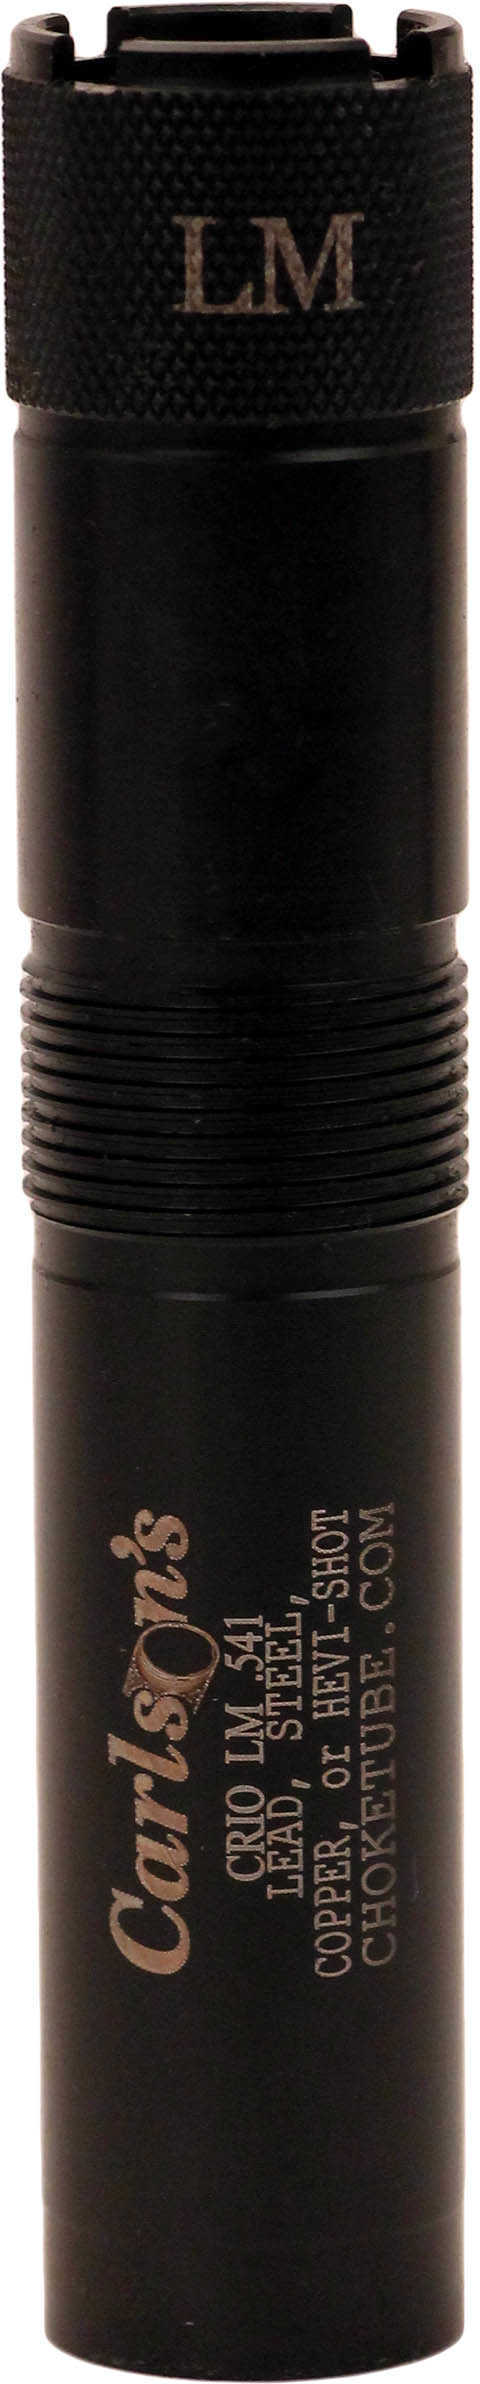 Carlsons Benelli Crio Plus 28 Gauge Black Sporting Clay Choke Tubes Light Modified Md: 23014